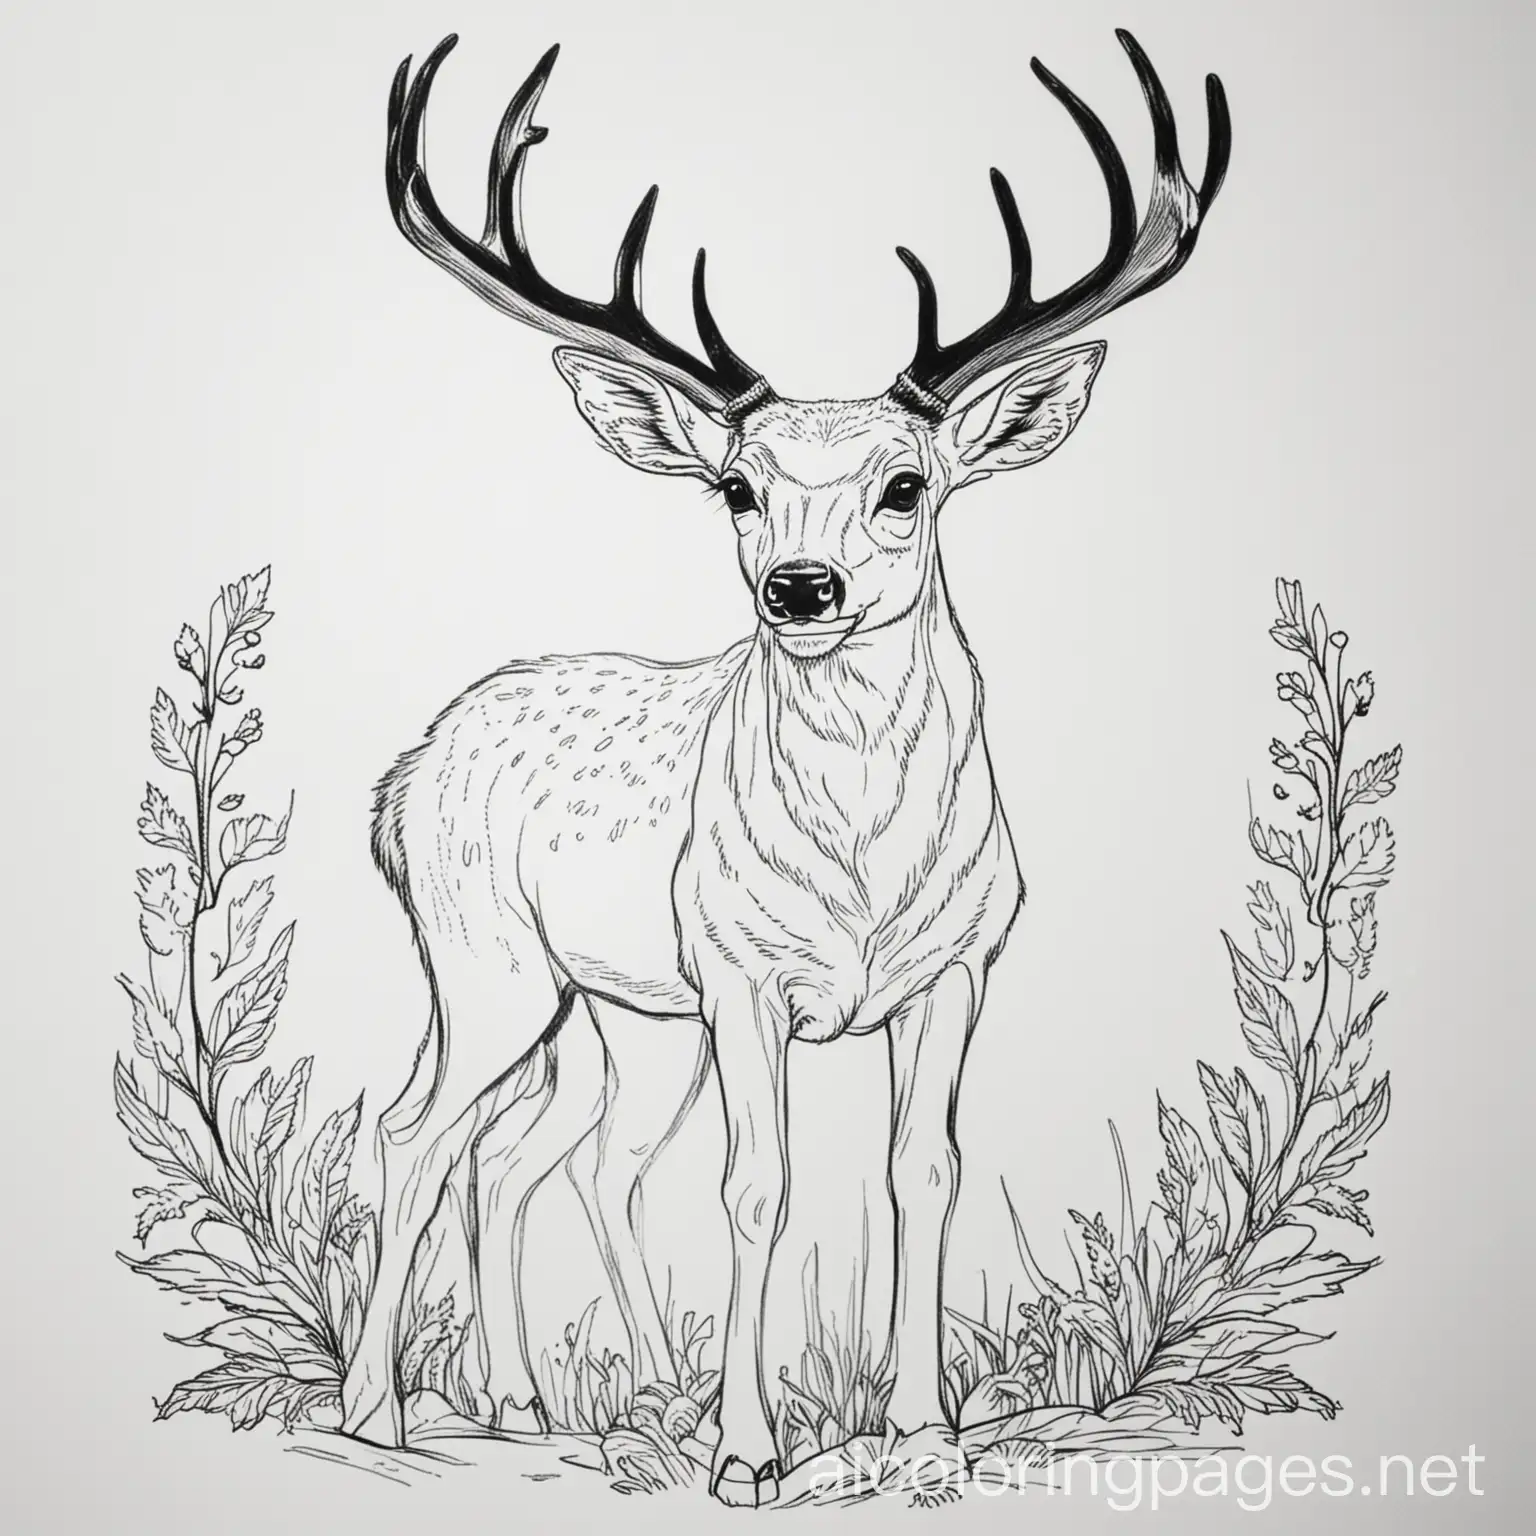 Deer-Coloring-Page-Simplistic-Black-and-White-Line-Art-on-White-Background